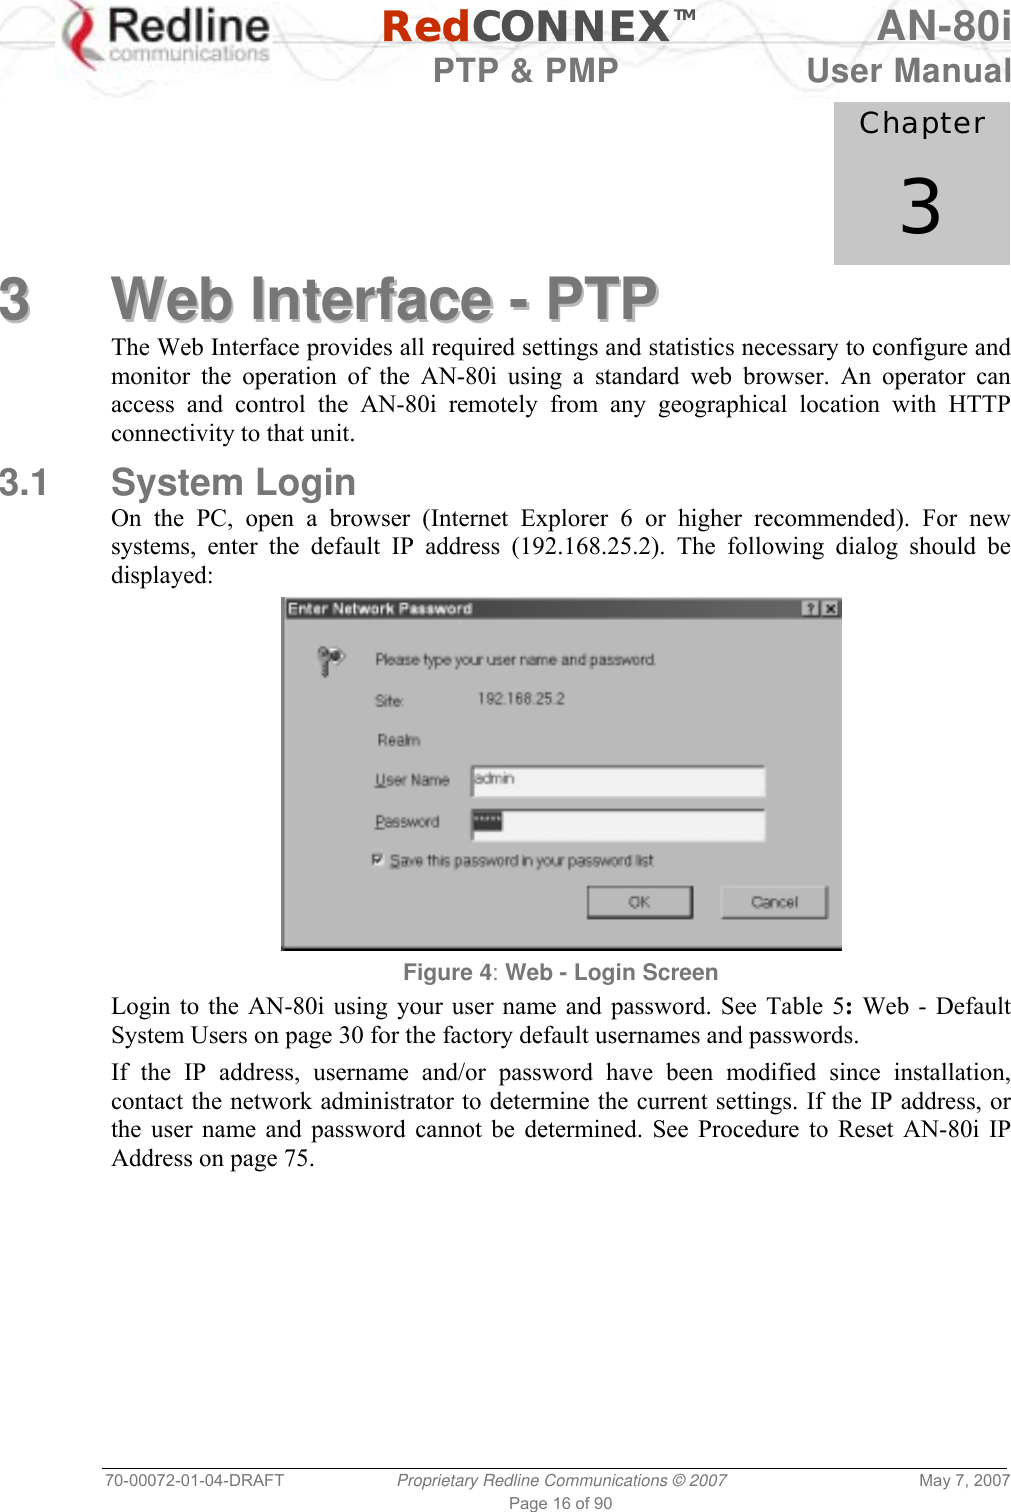   RedCONNEXTM AN-80i   PTP &amp; PMP  User Manual 70-00072-01-04-DRAFT  Proprietary Redline Communications © 2007  May 7, 2007 Page 16 of 90            Chapter 3 33  WWeebb  IInntteerrffaaccee  --  PPTTPP  The Web Interface provides all required settings and statistics necessary to configure and monitor the operation of the AN-80i using a standard web browser. An operator can access and control the AN-80i remotely from any geographical location with HTTP connectivity to that unit. 3.1 System Login On the PC, open a browser (Internet Explorer 6 or higher recommended). For new systems, enter the default IP address (192.168.25.2). The following dialog should be displayed:  Figure 4: Web - Login Screen Login to the AN-80i using your user name and password. See Table 5: Web - Default System Users on page 30 for the factory default usernames and passwords. If the IP address, username and/or password have been modified since installation, contact the network administrator to determine the current settings. If the IP address, or the user name and password cannot be determined. See Procedure to Reset AN-80i IP Address on page 75. 